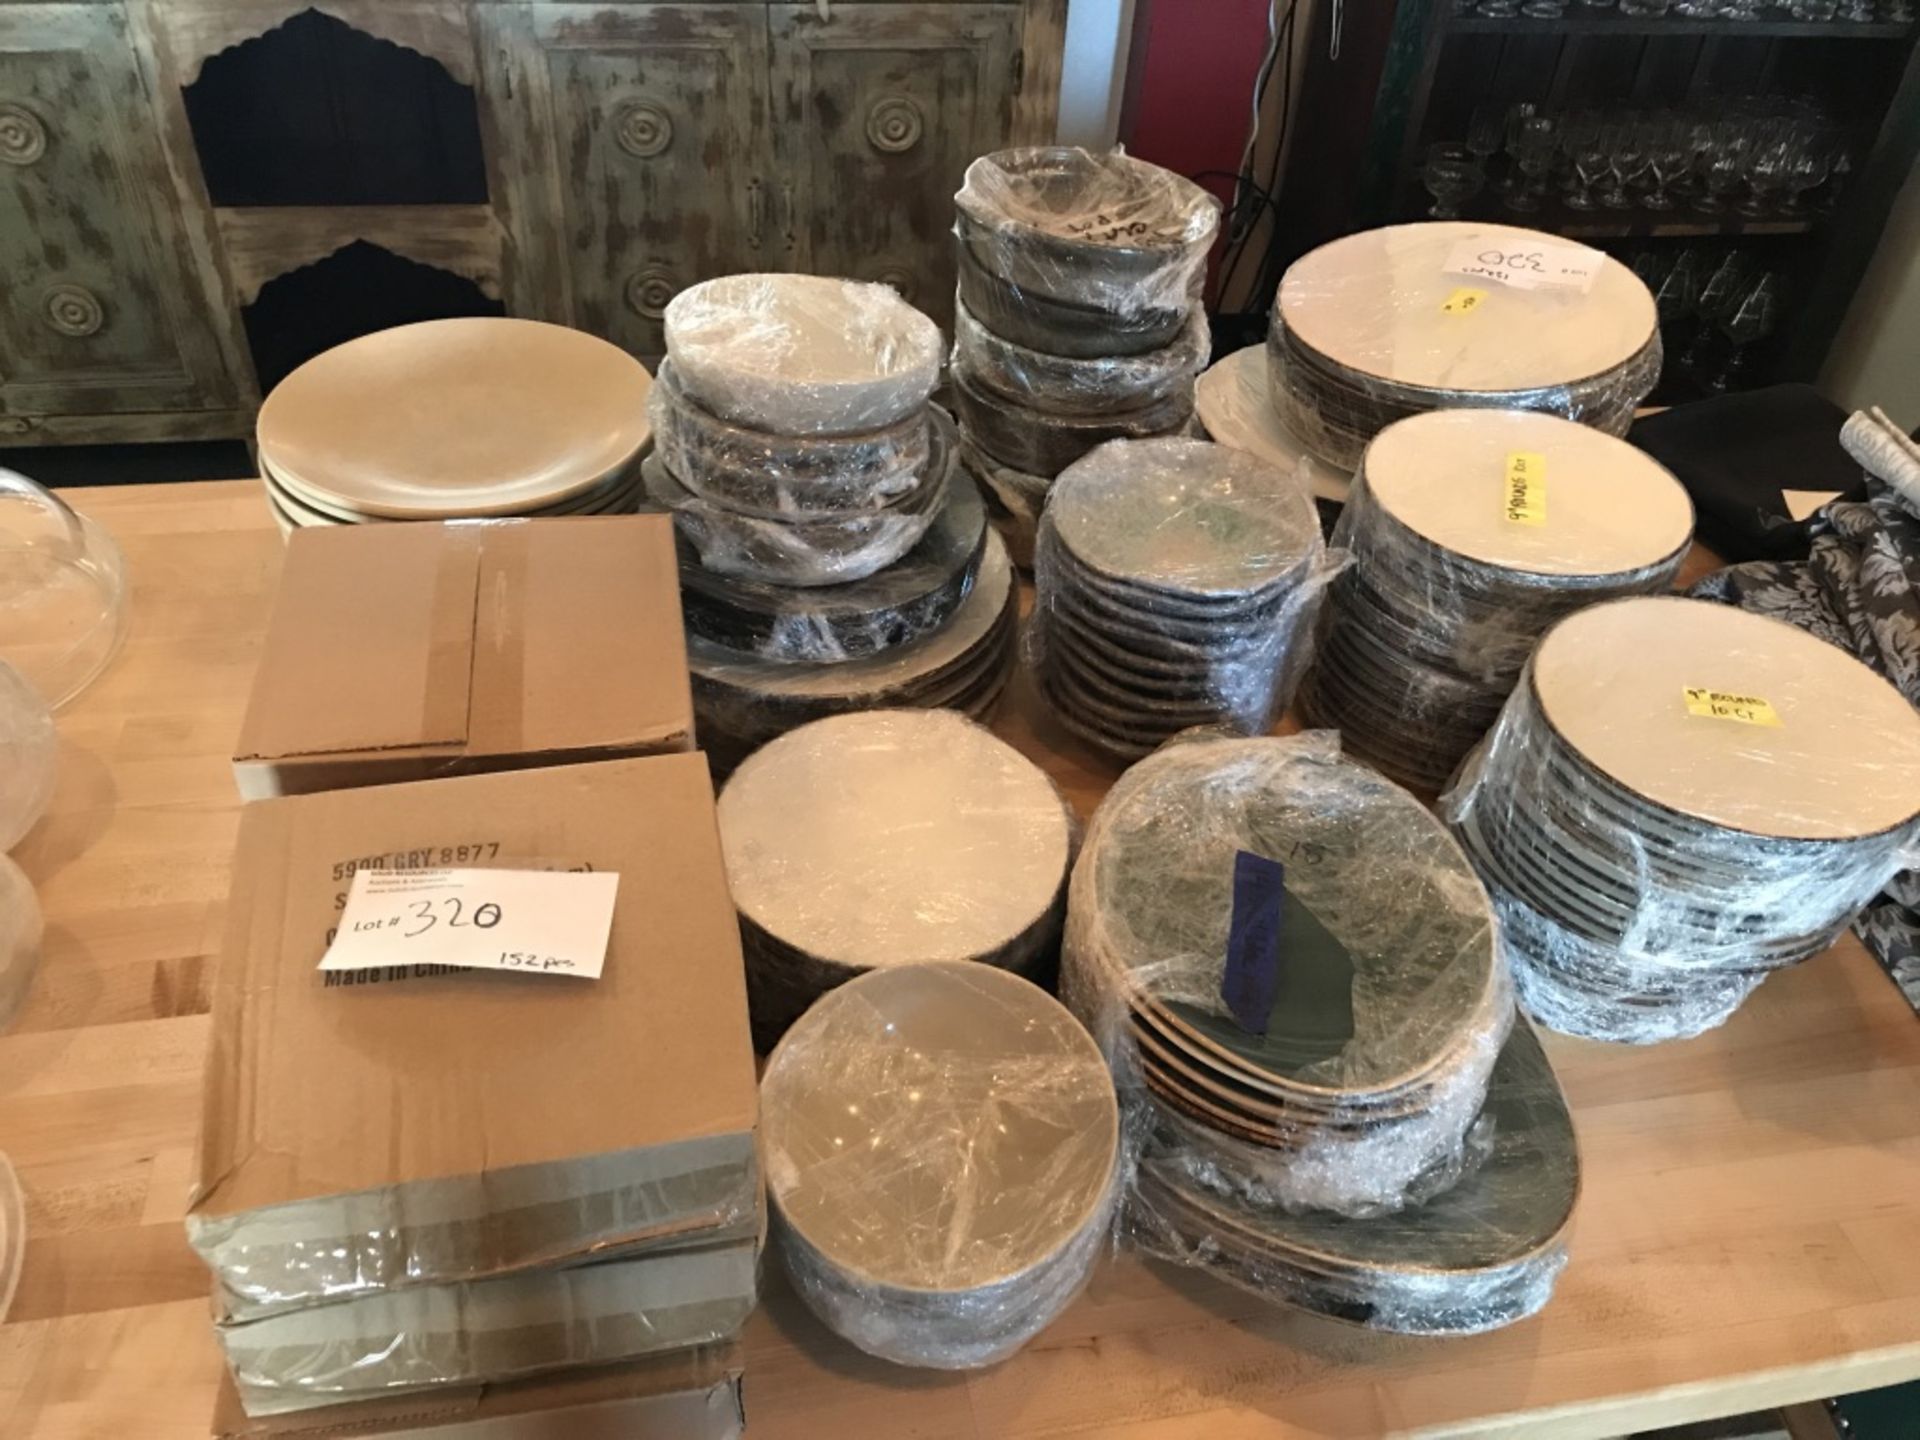 LOT OF: (152) VARIOUS DISHES TO INCLUDE: CLAY POTS, PLATES, BOWLS